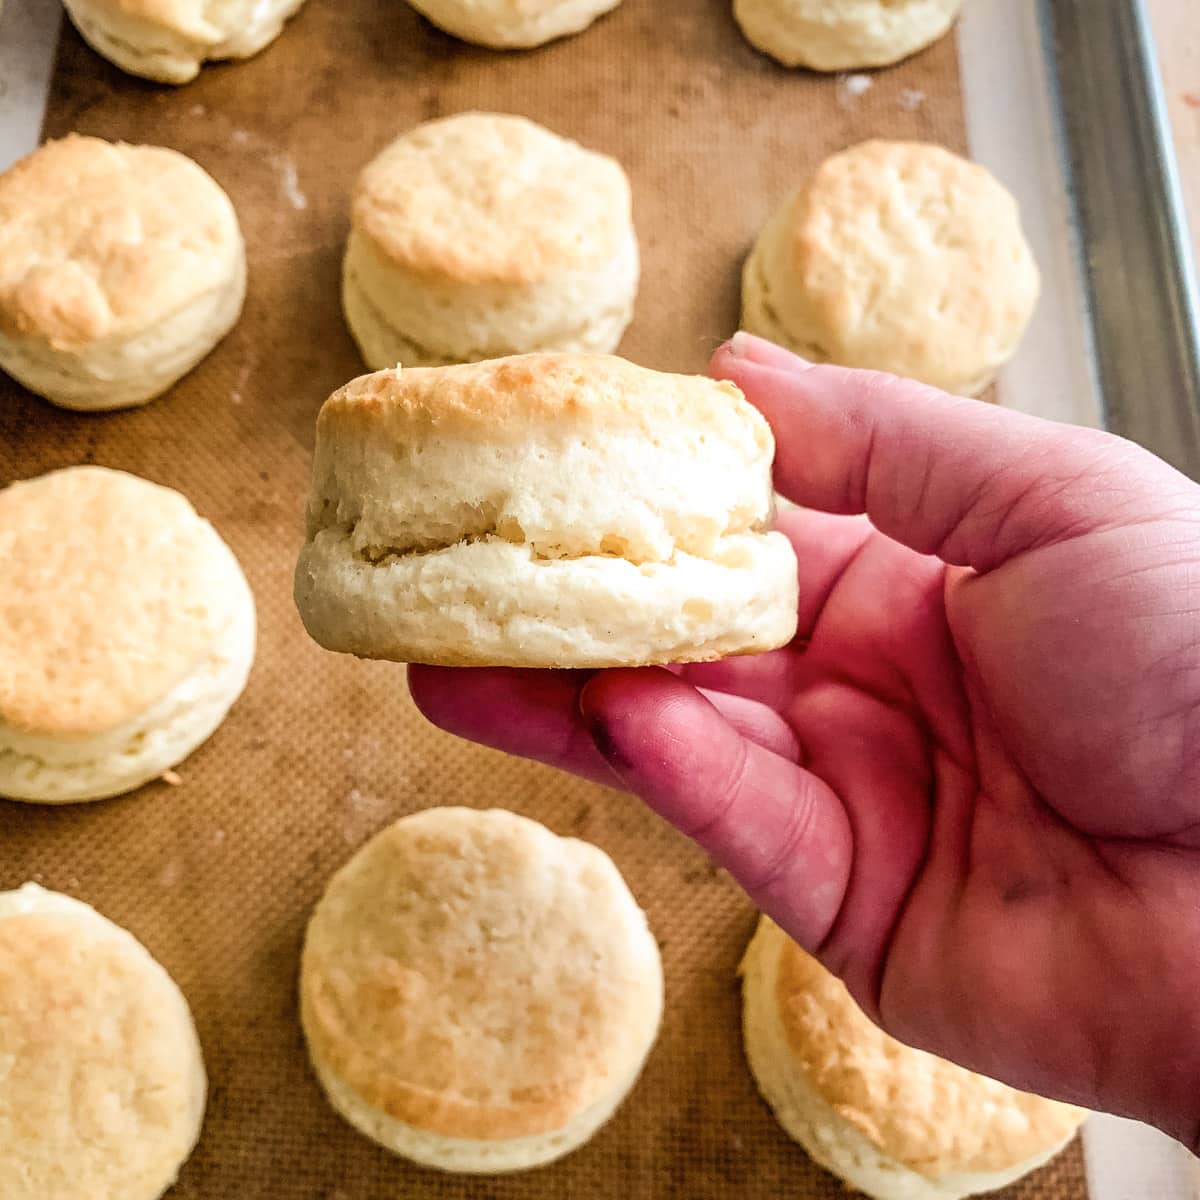 A close up image of a rolled biscuit.